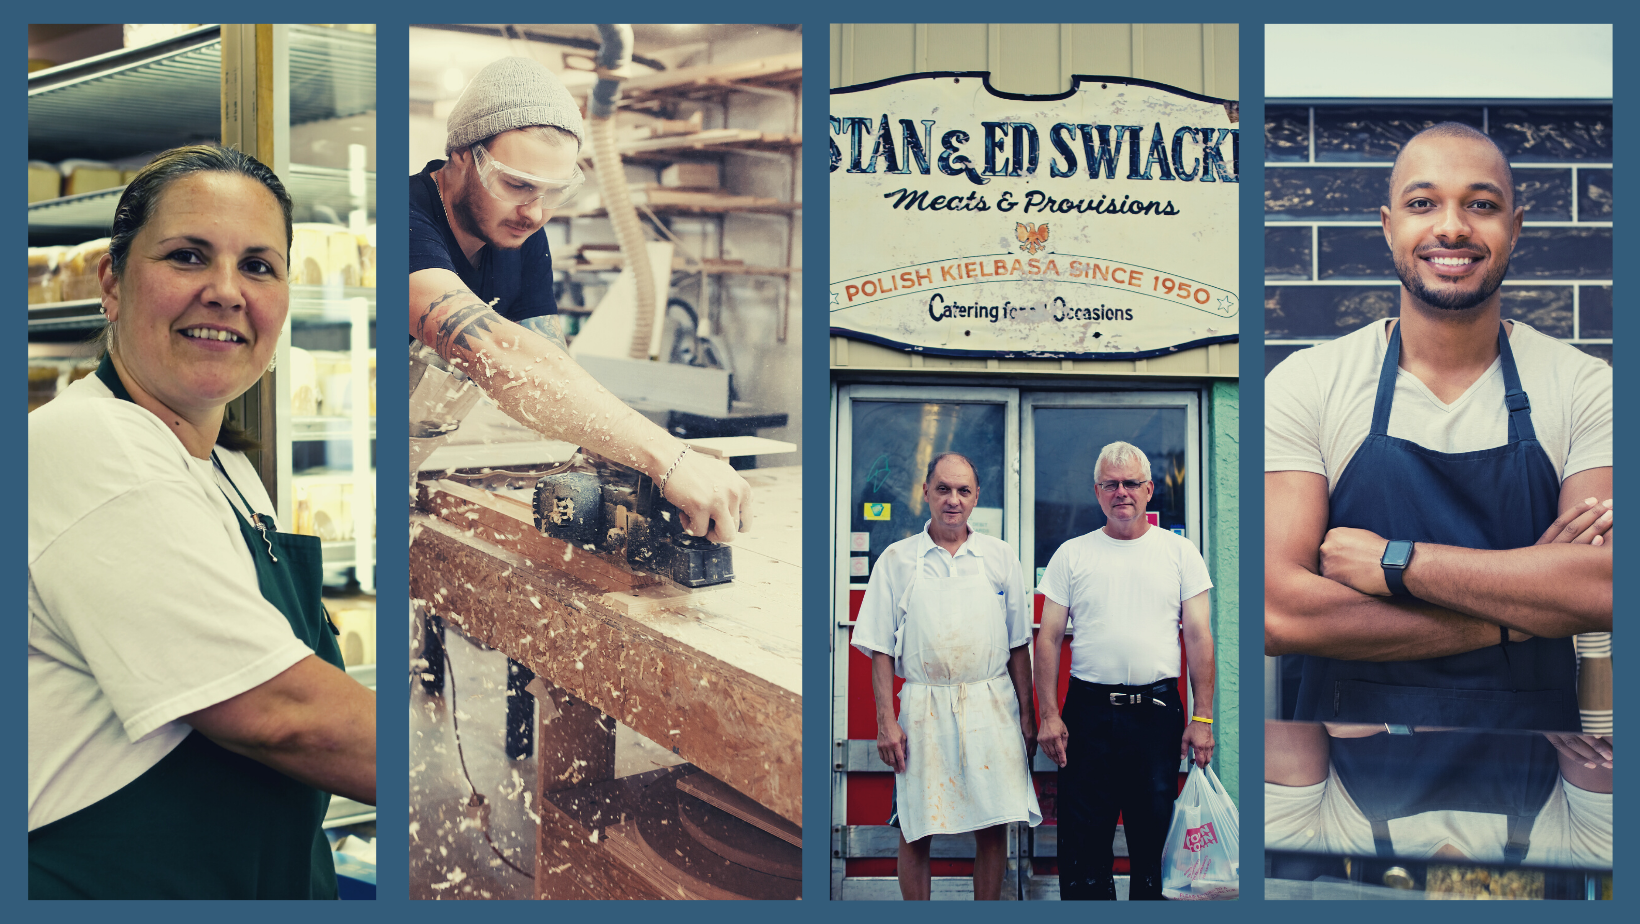 A collage of proud small business owners, including Stocks Bakery, a carpenter, Swiacki's Meats, and a barista. 